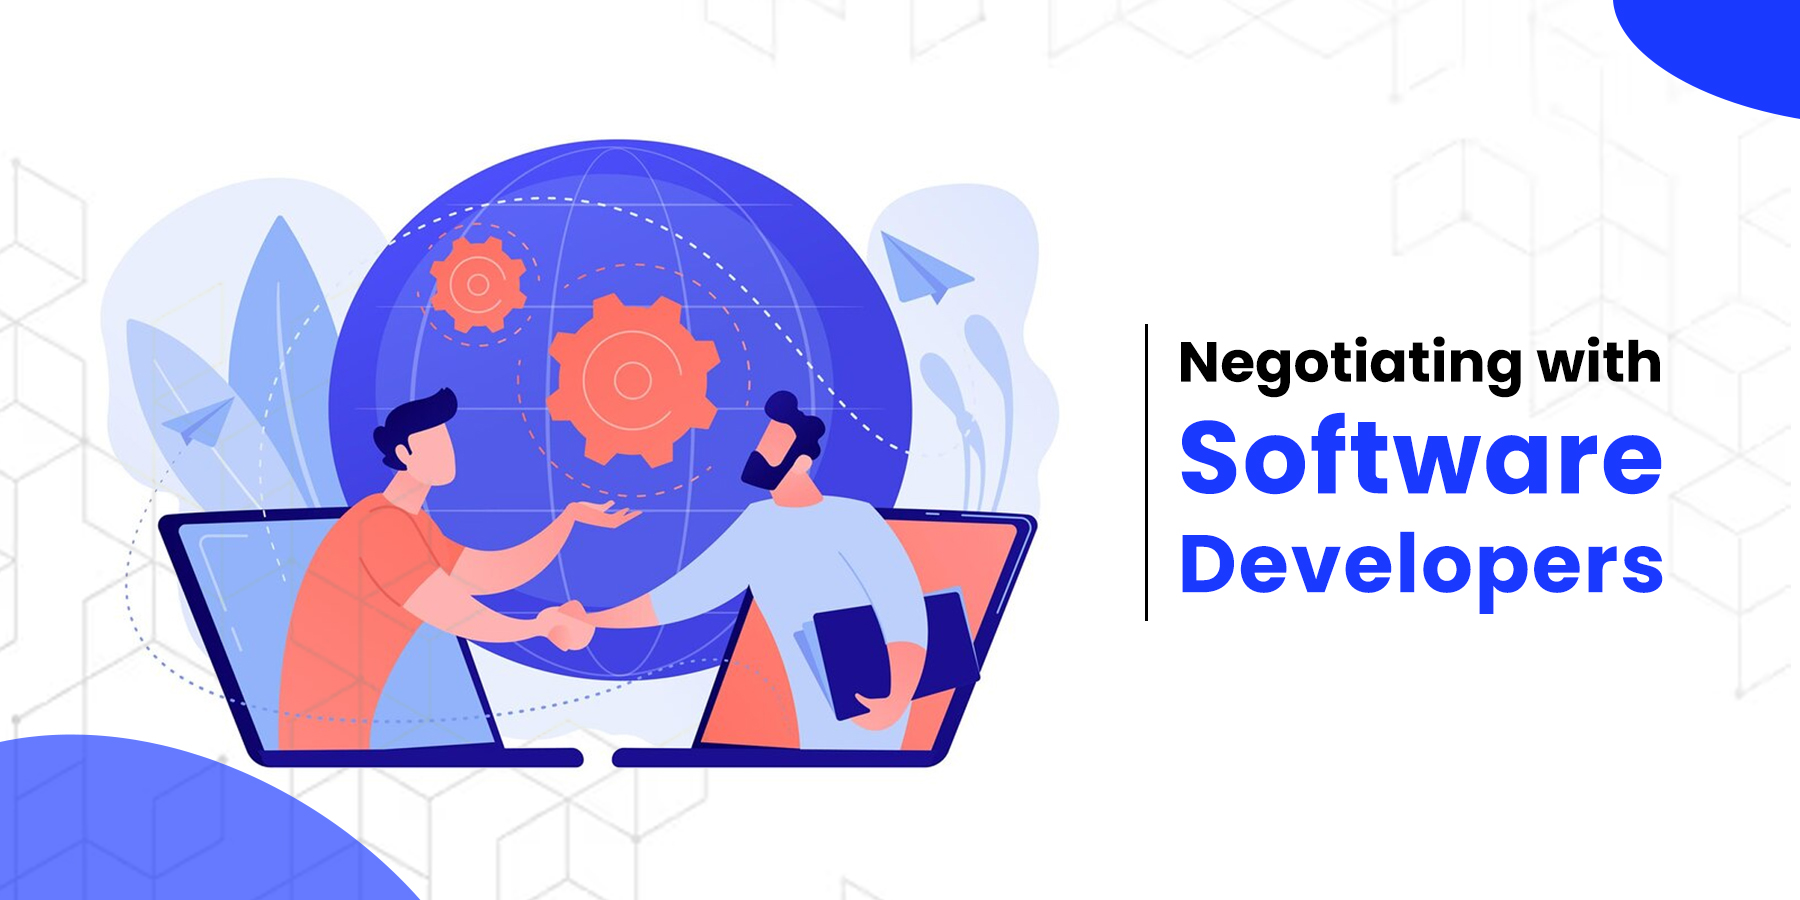 Negotiating with Software Developers